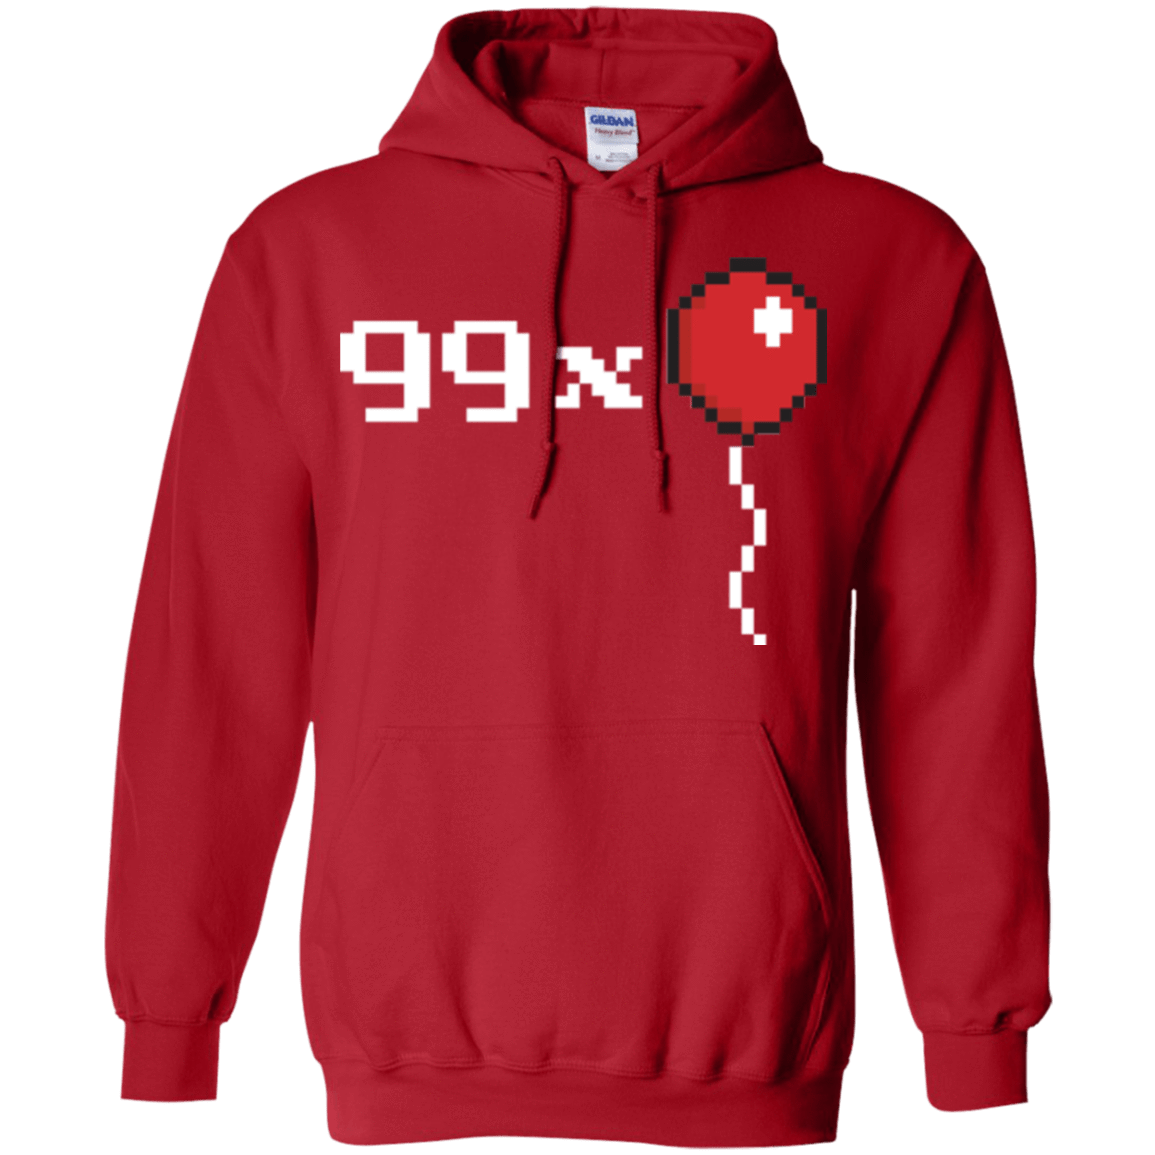 Sweatshirts Red / Small 99x Balloon Pullover Hoodie